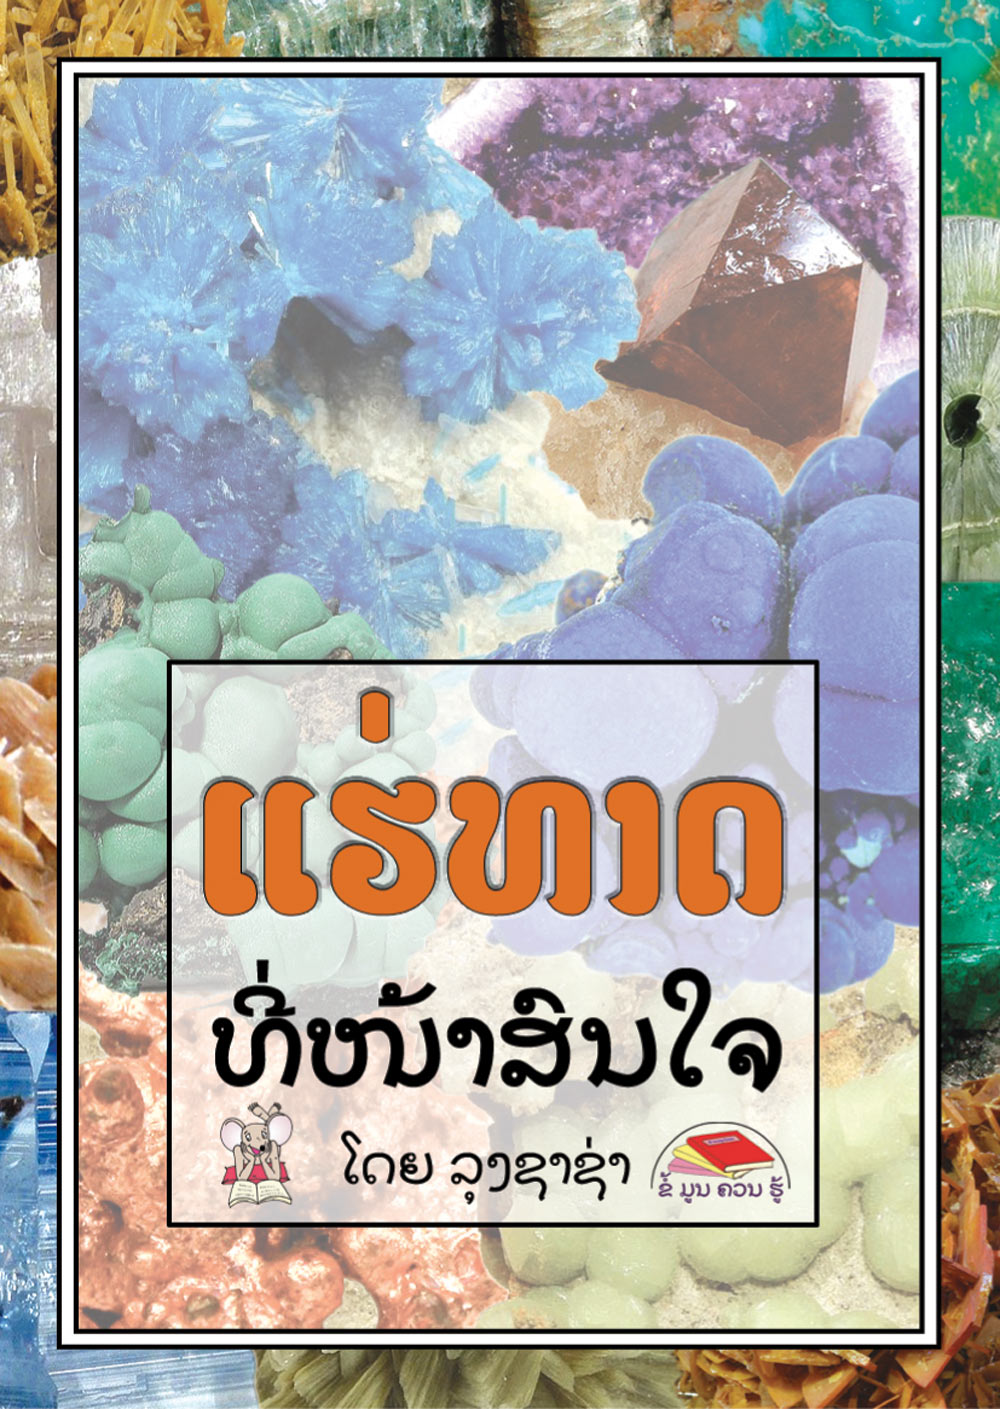 Minerals are Fascinating! large book cover, published in Lao language